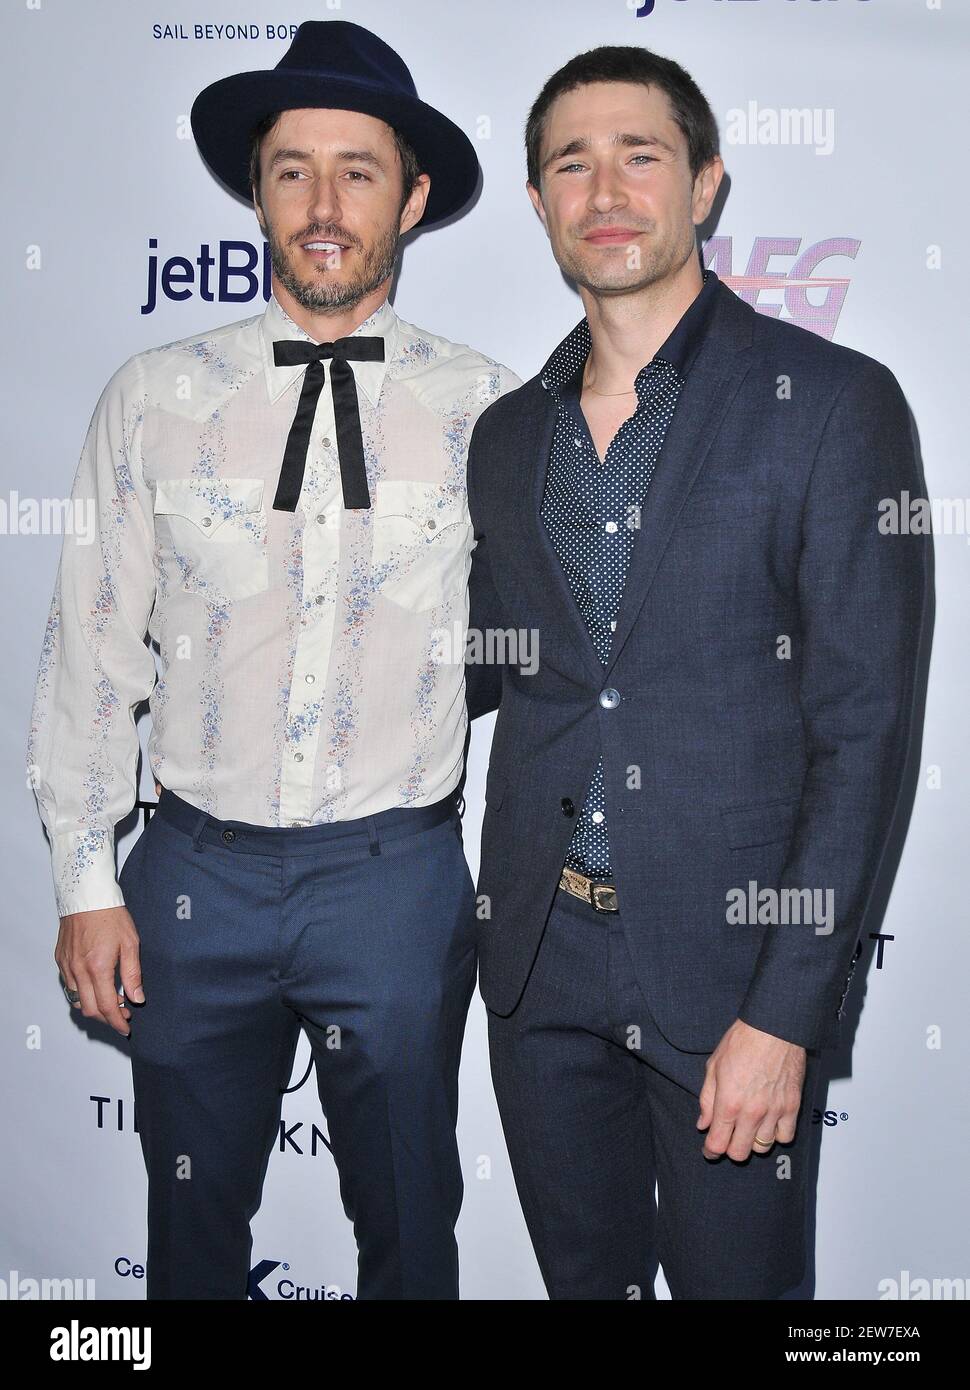 L-R) Blue Hamilton and Matt Dallas arrives at Jessie Tyler Ferguson's 'Tie  The Knot' 5 Year Anniversary celebration held at NeueHouse Hollywood in Los  Angeles, CA on Thursday, October 12, 2017. (Photo